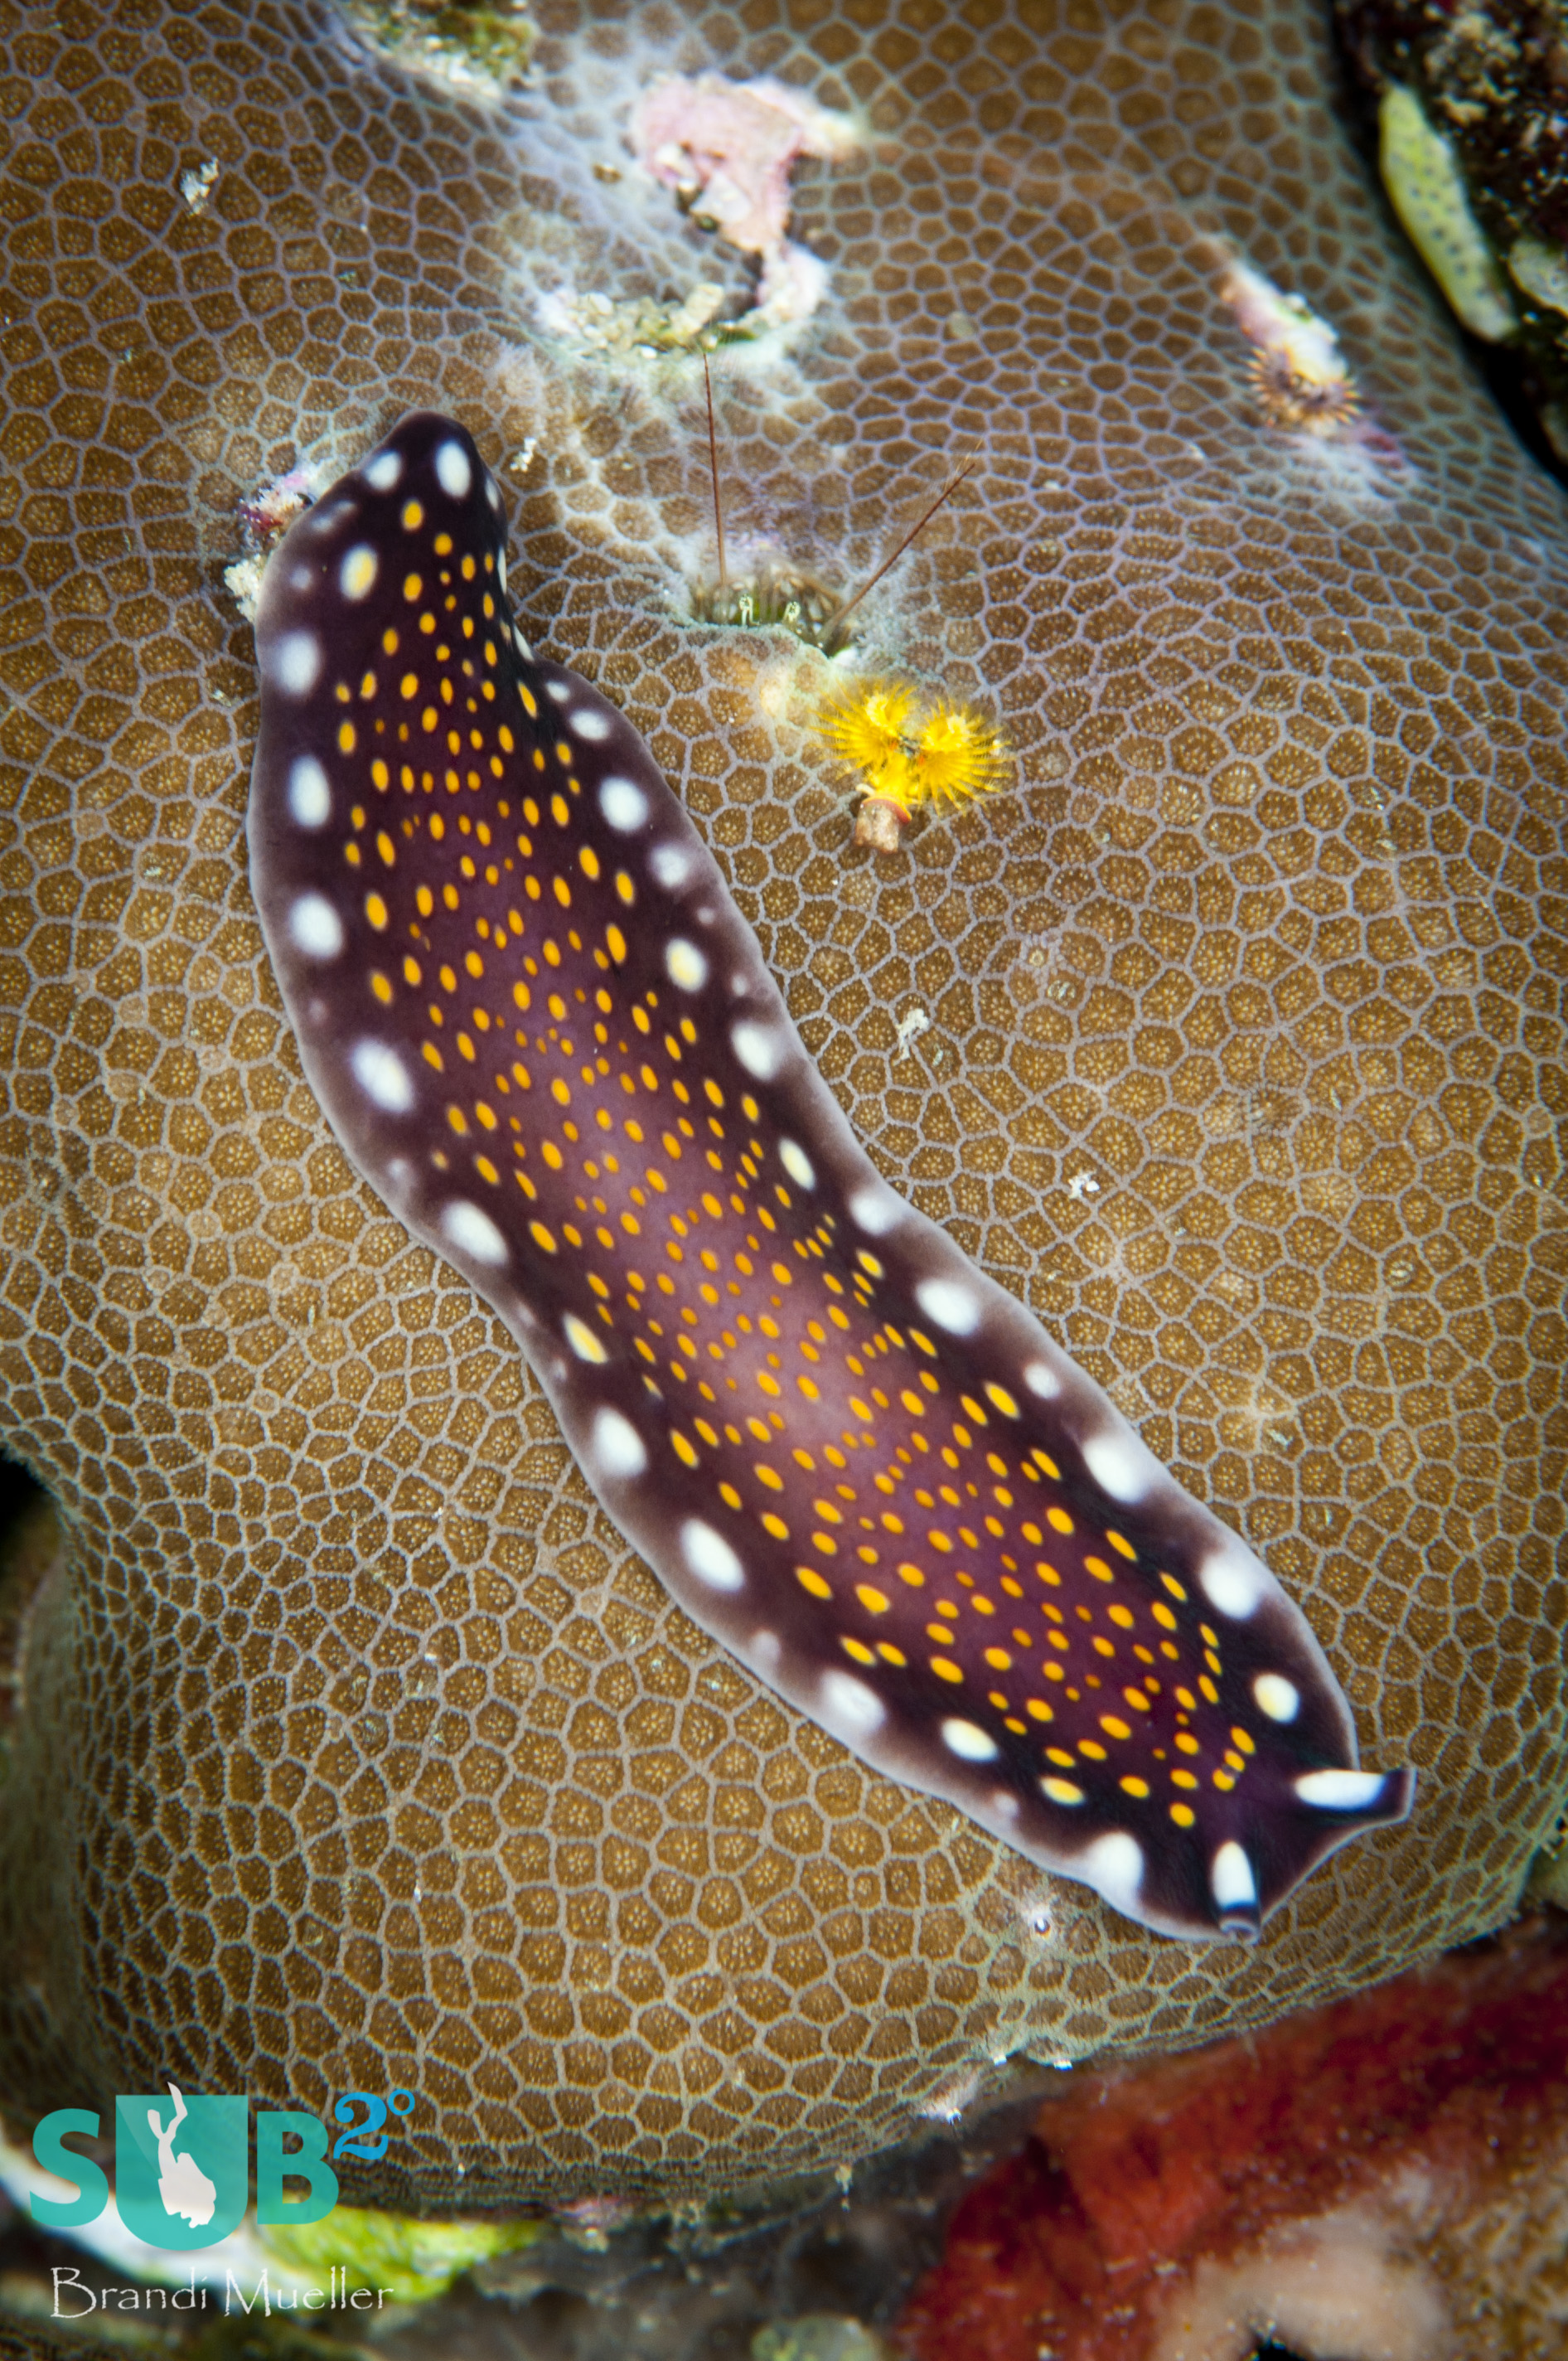 Linda's flatworm, or Pseudoceros lindae is found throughout the Indo-Pacific.